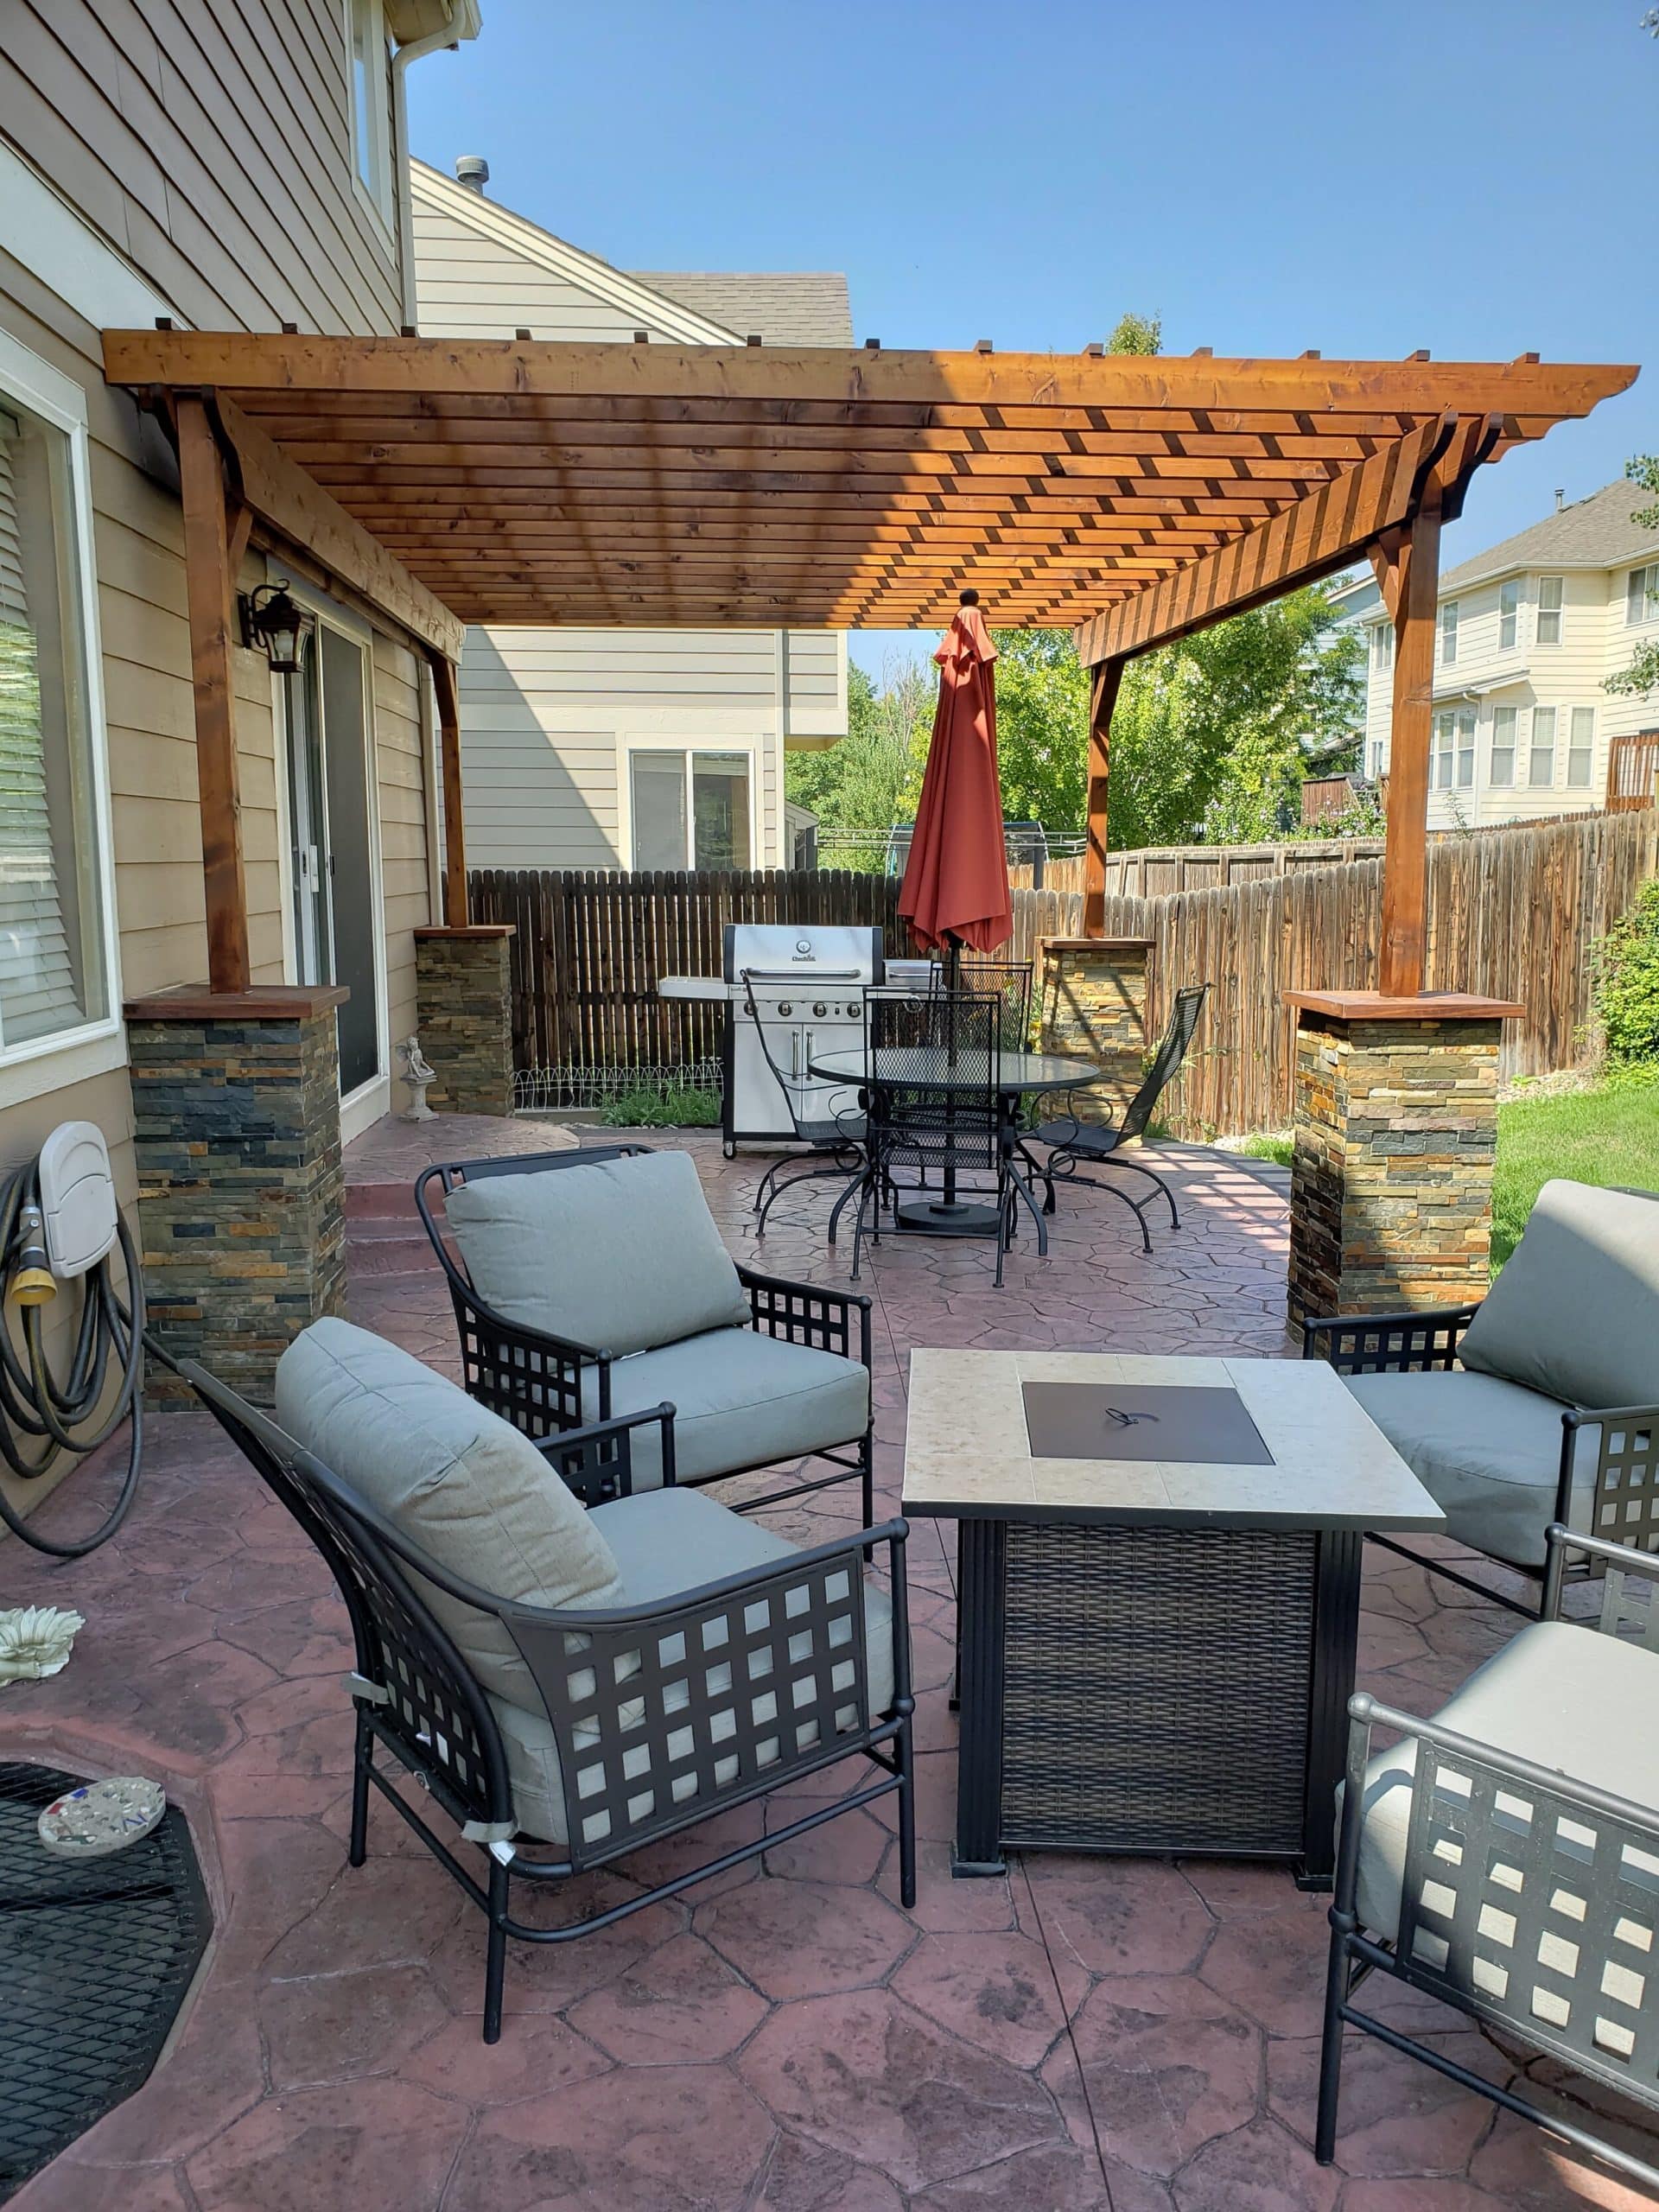 Patio furniture in a home's back yard